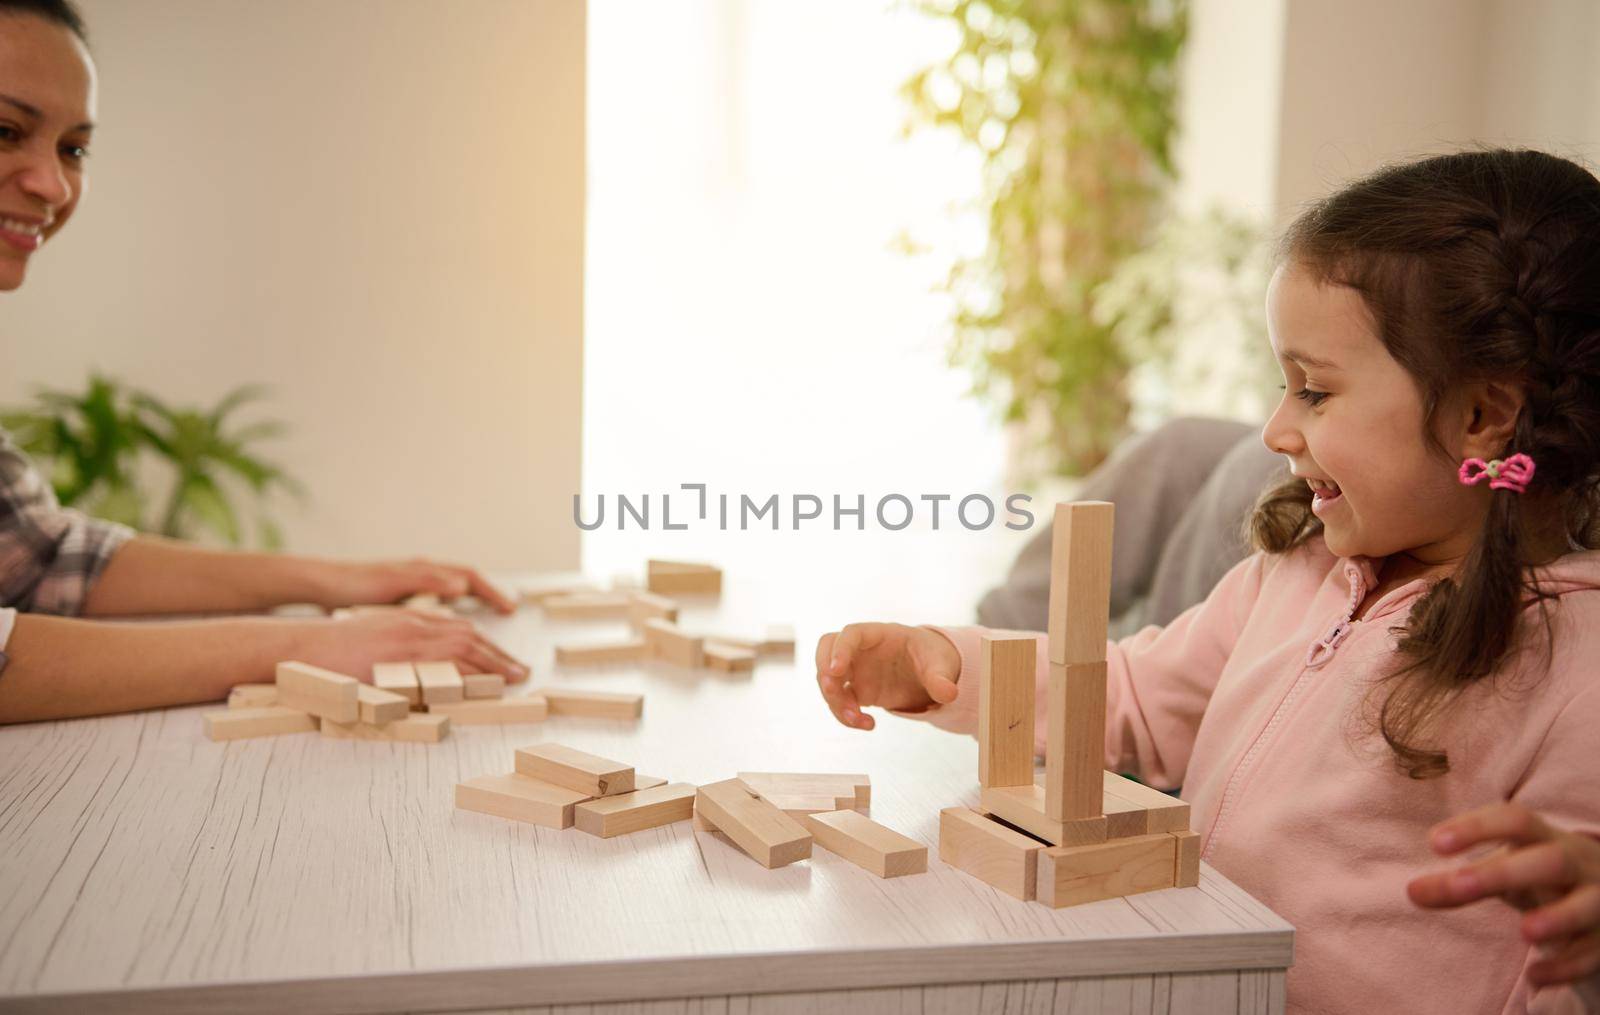 Beautiful child, adorable little girl in pink sweatshirt plays board game with her mother, builds wooden structures from wooden bricks and blocks, smiles toothy smile, enjoying her educational pastime